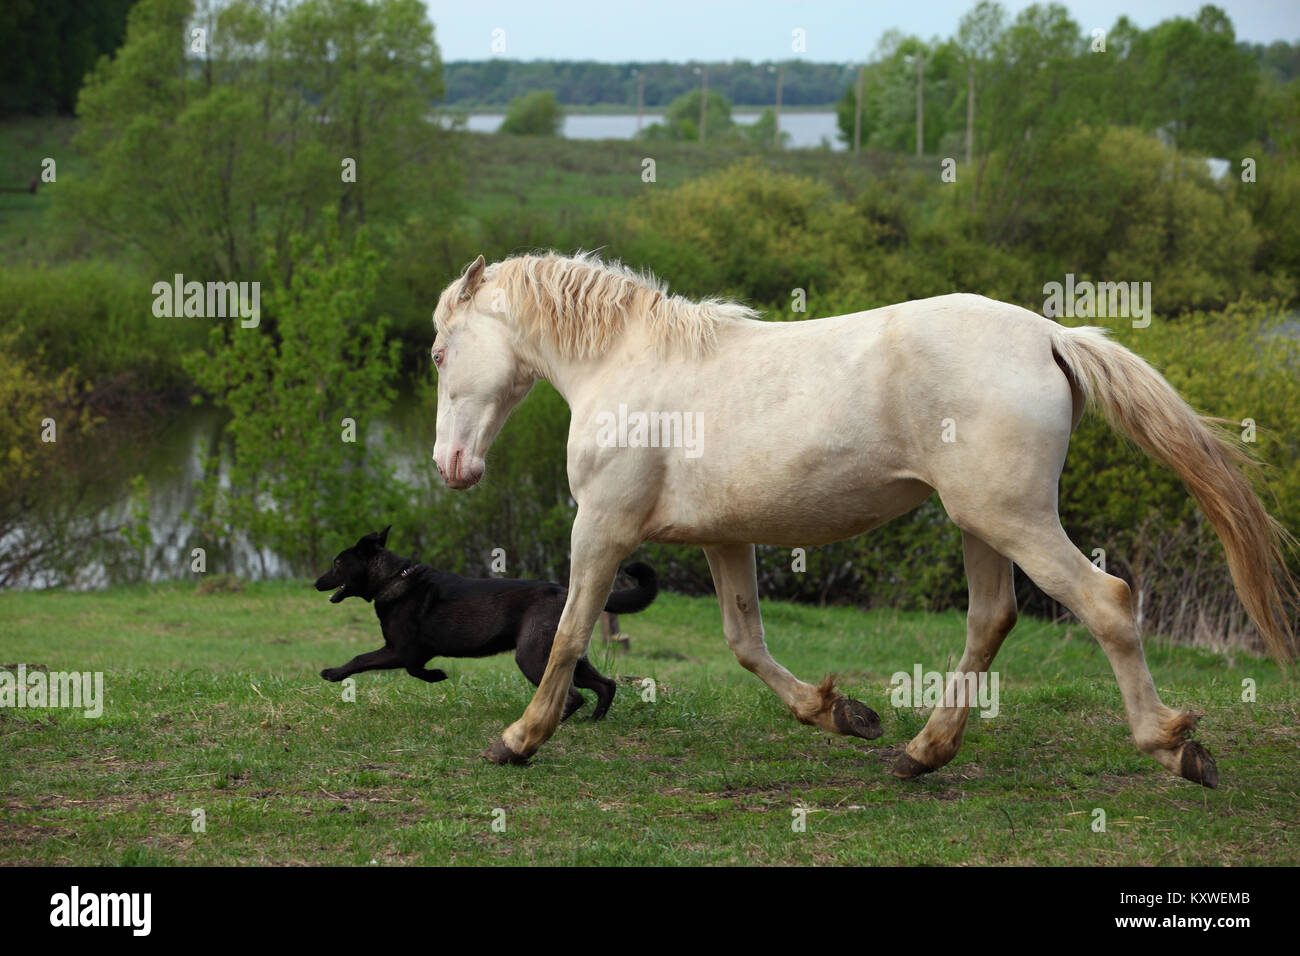 Animal friendship warm blooded cremello horse playing with dog Stock Photo